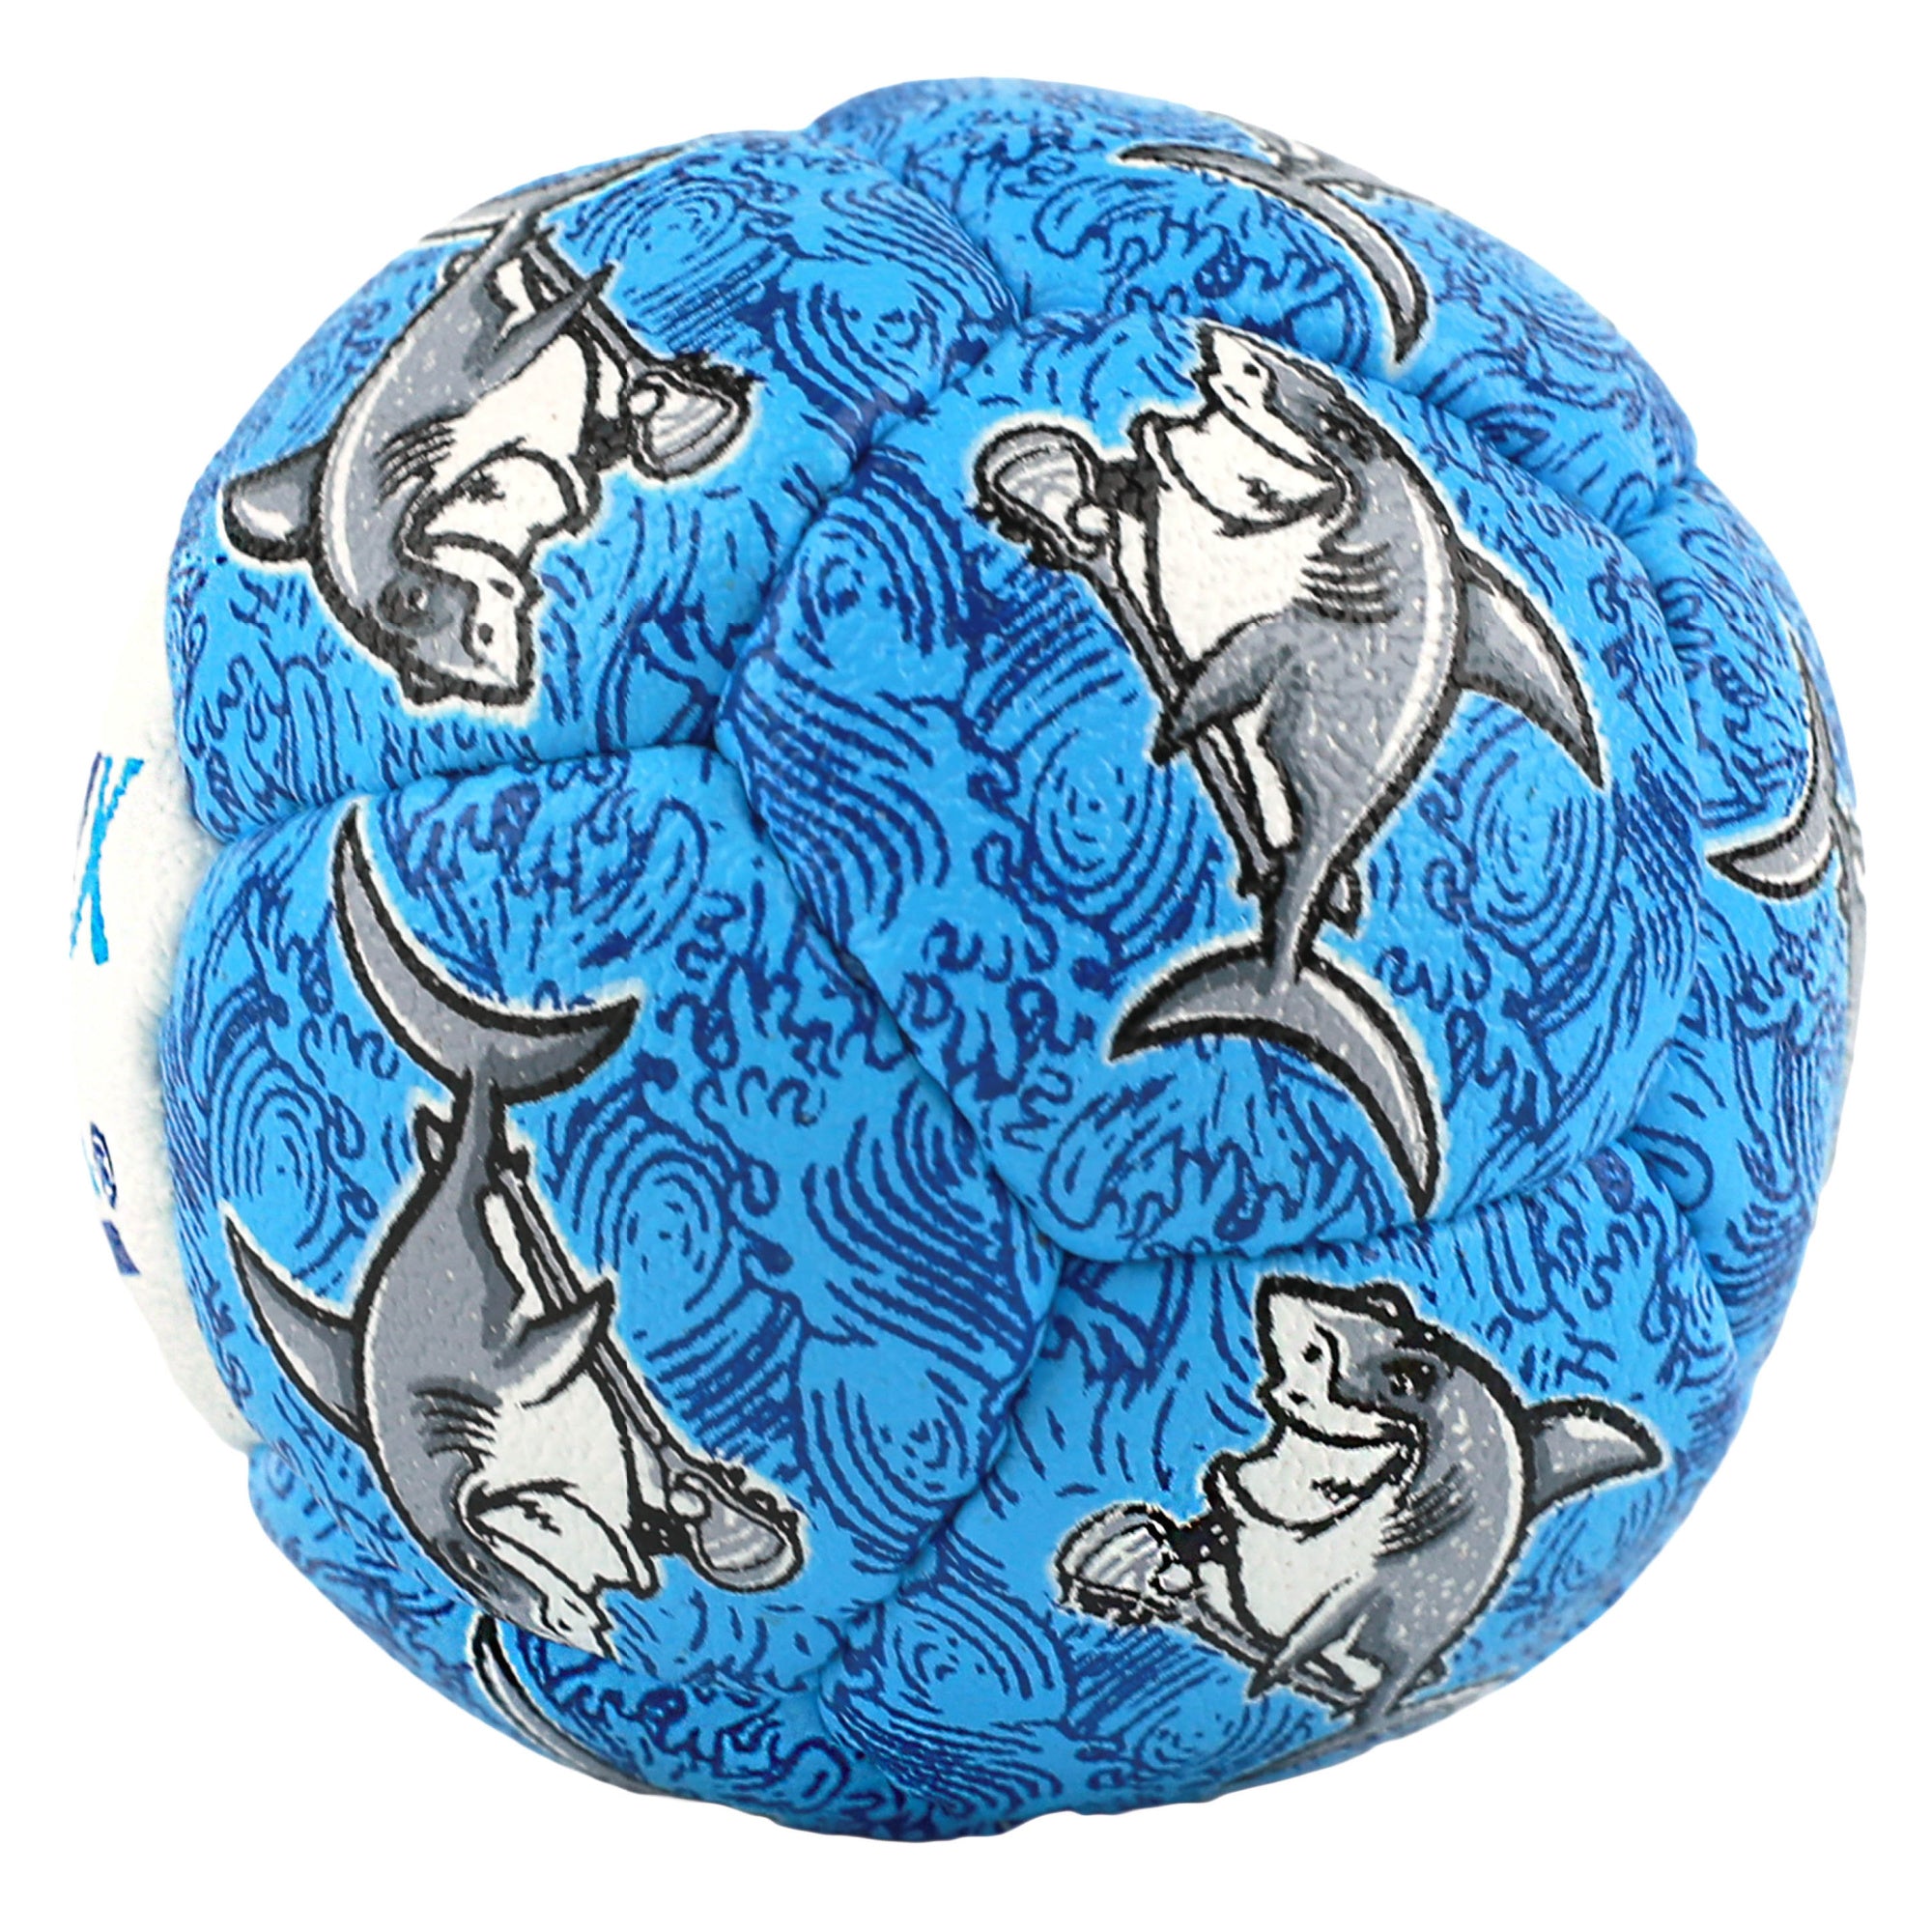 Swax Lax Shark Lacrosse Training Ball - Side View